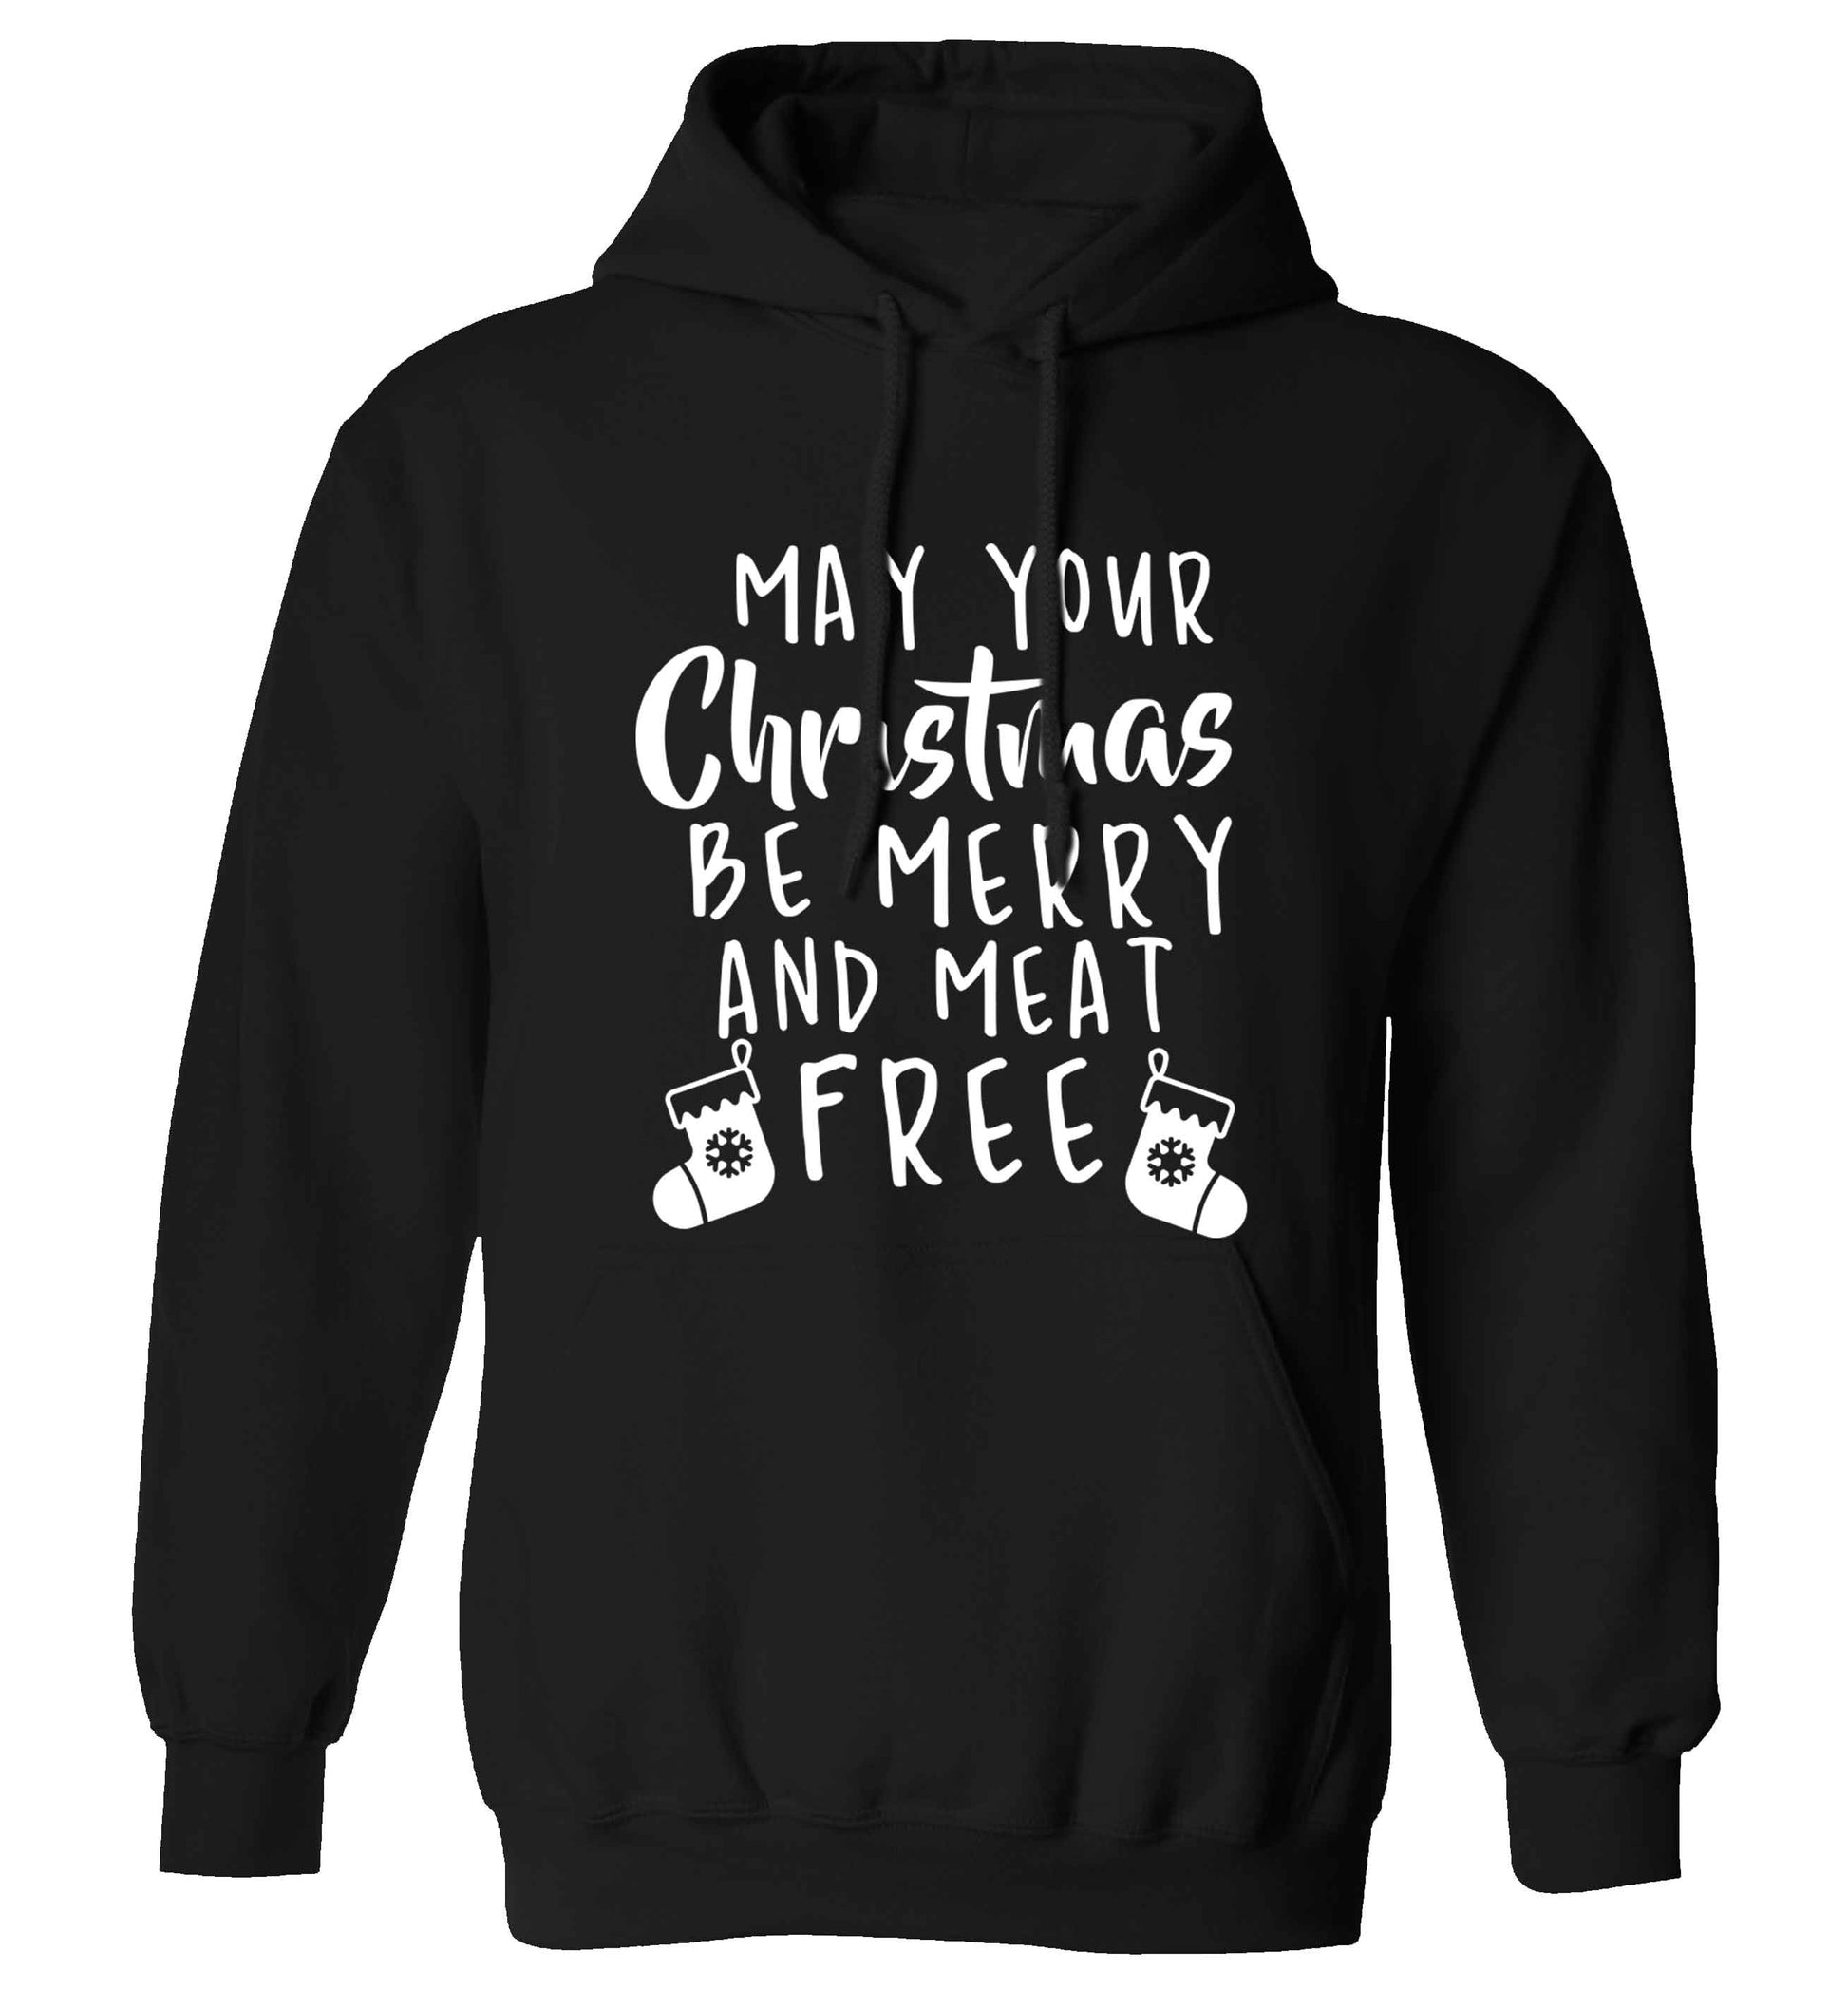 May your Christmas be merry and meat free adults unisex black hoodie 2XL